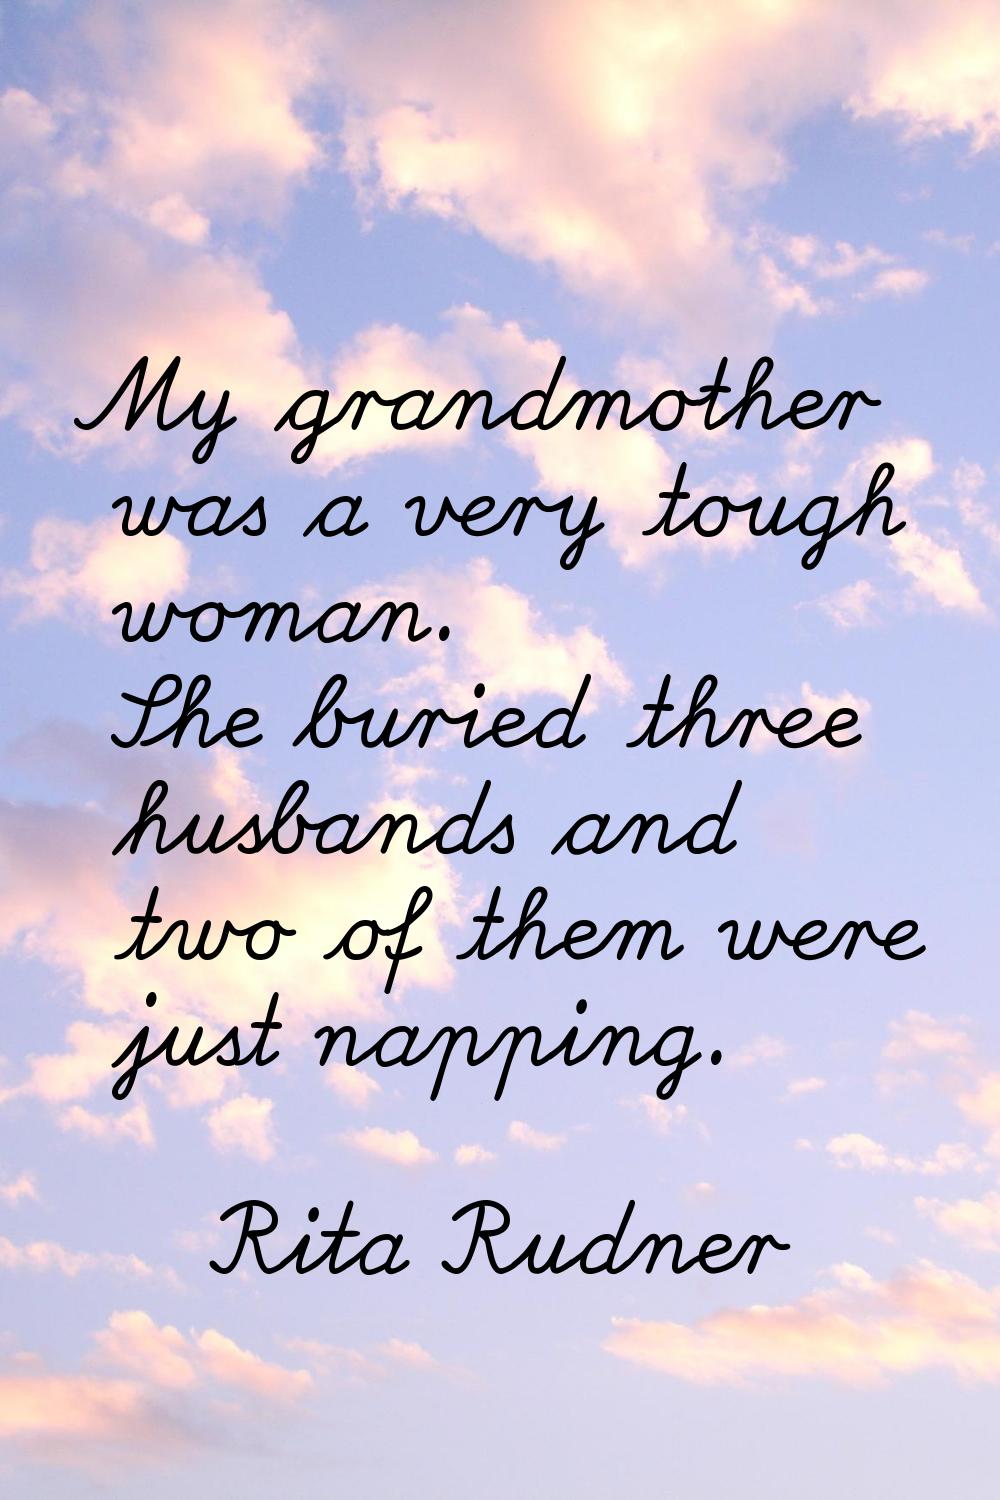 My grandmother was a very tough woman. She buried three husbands and two of them were just napping.